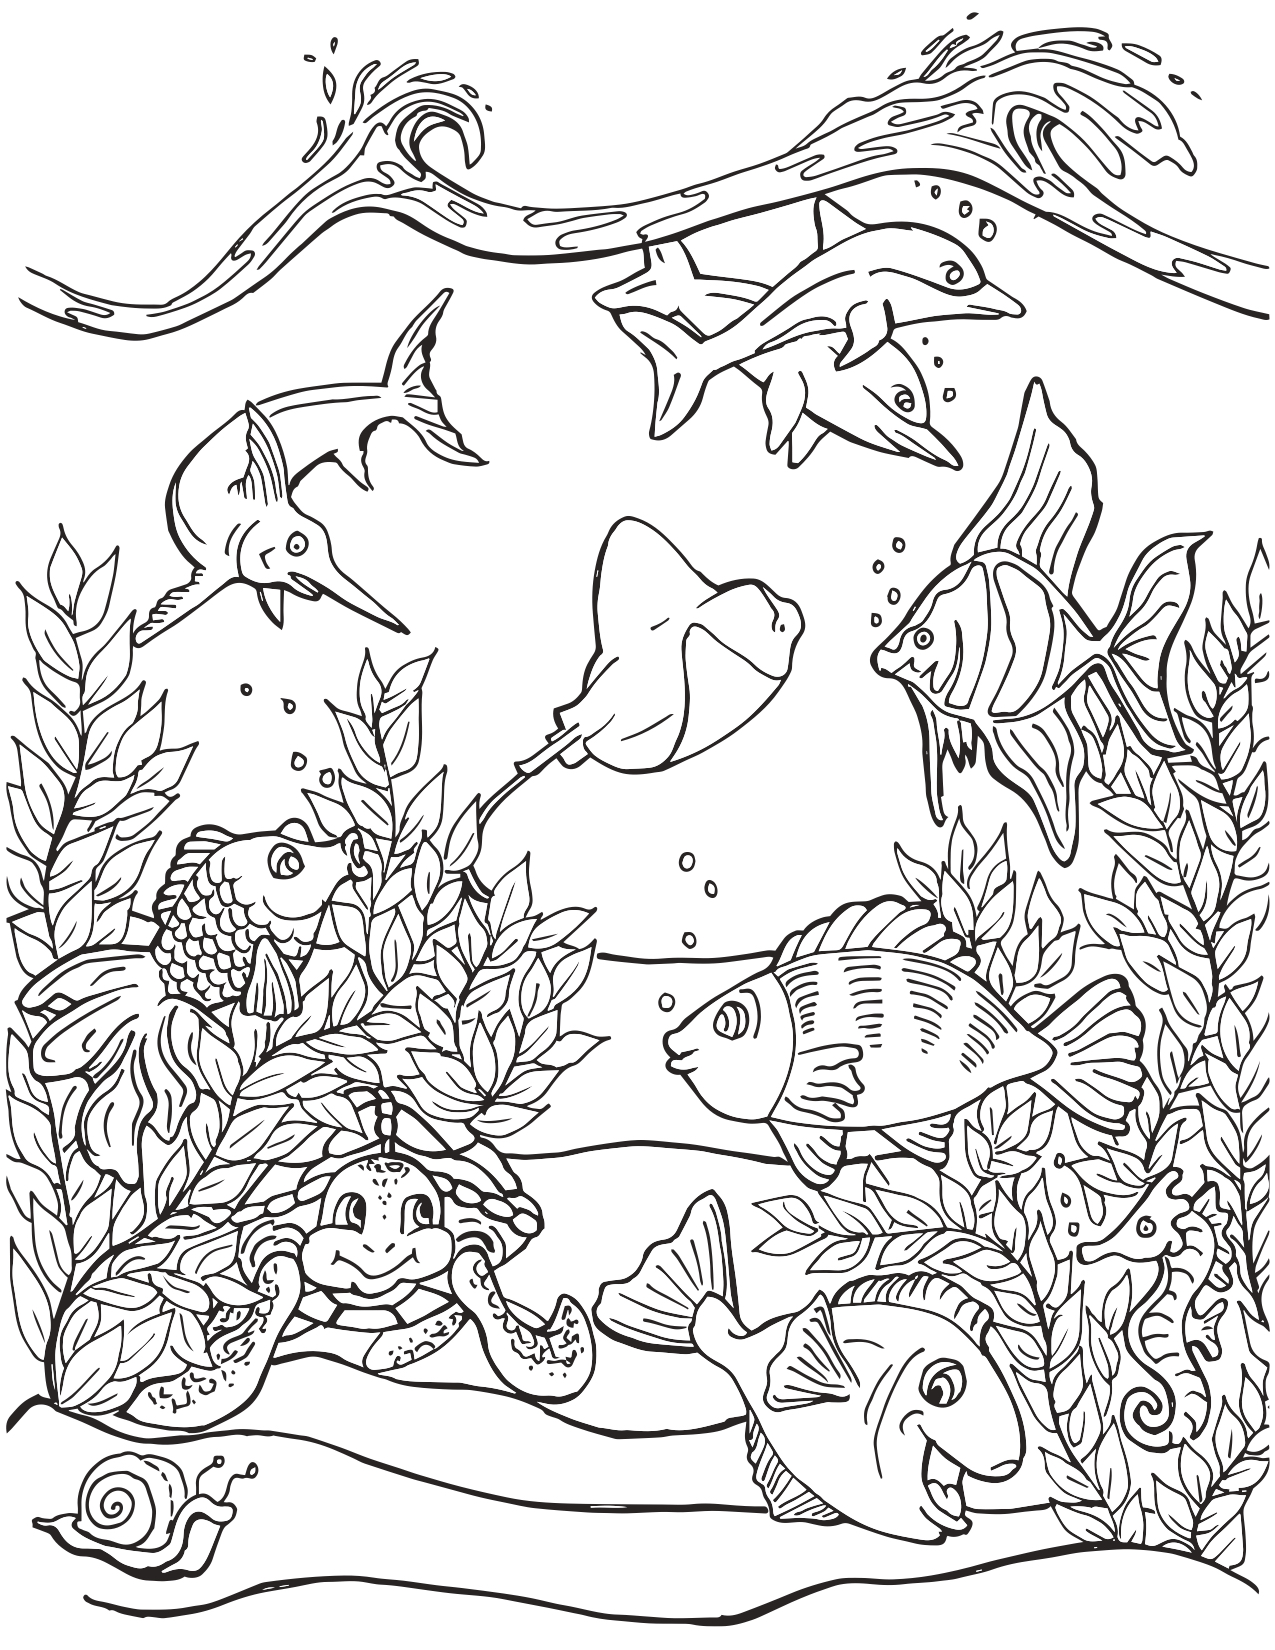 Life under the sea coloring page â mermaid coloring pages